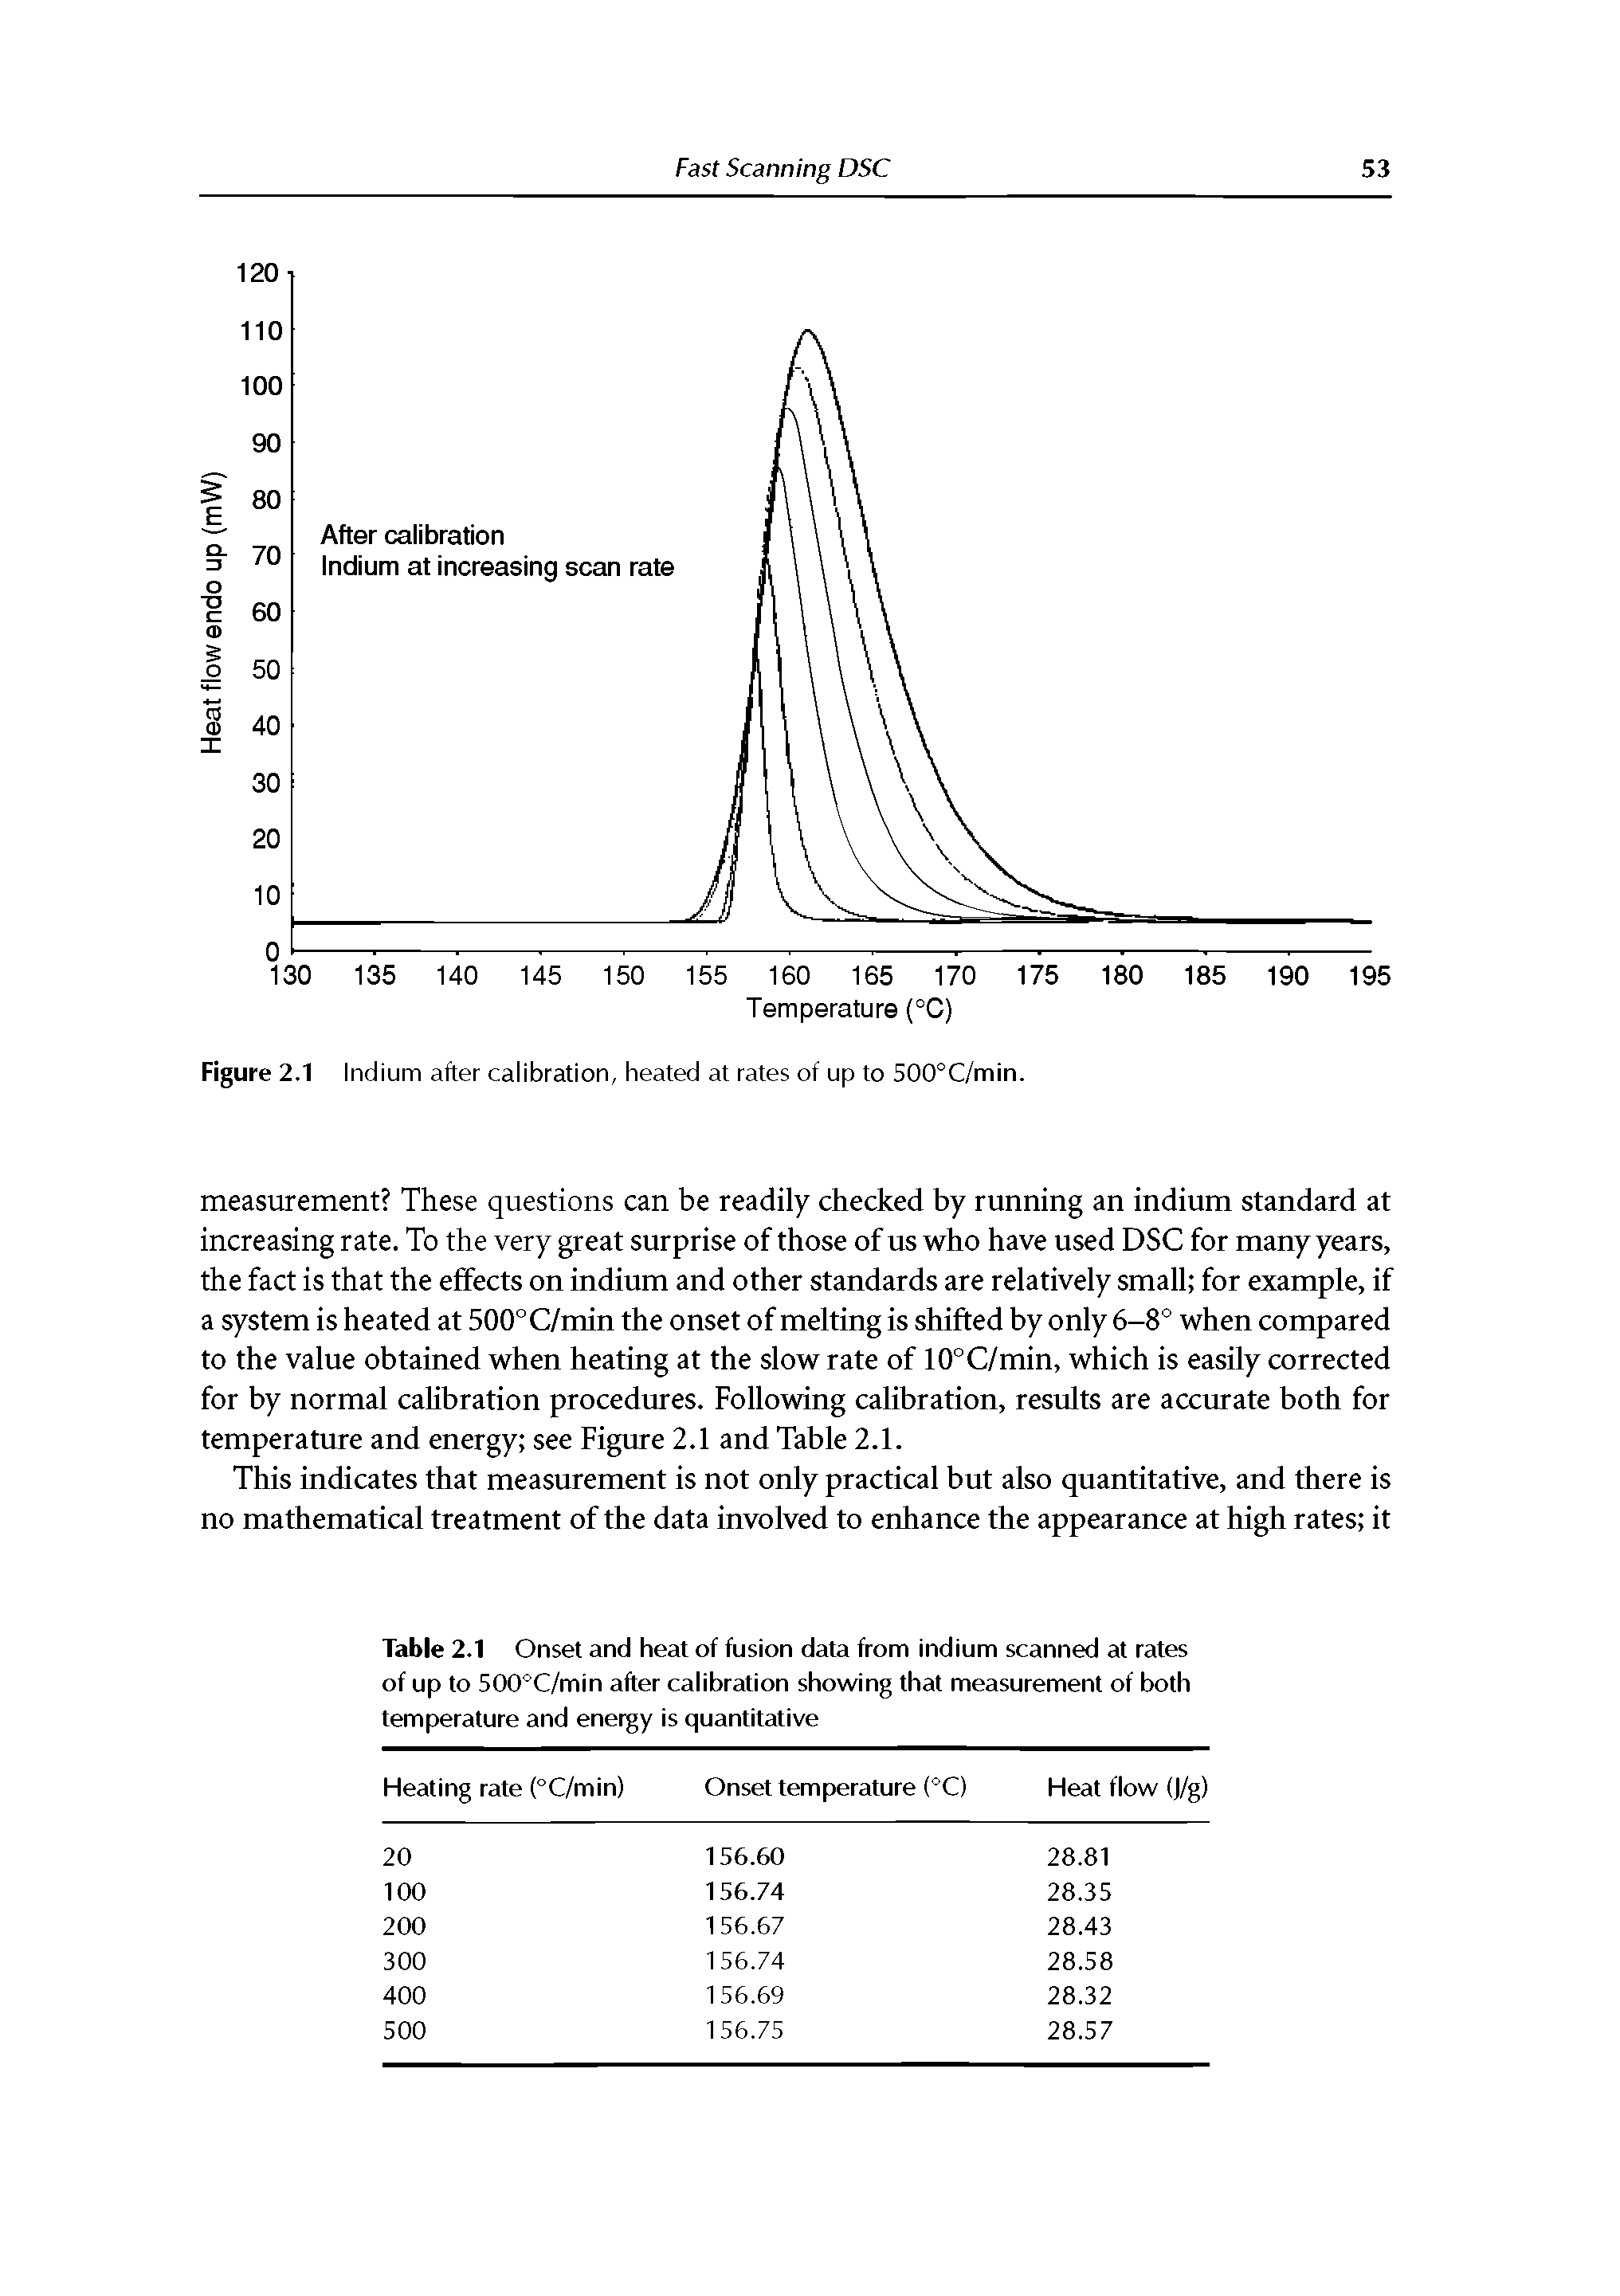 Figure 2.1 Indium after calibration, heated at rates of up to 500°C/min.